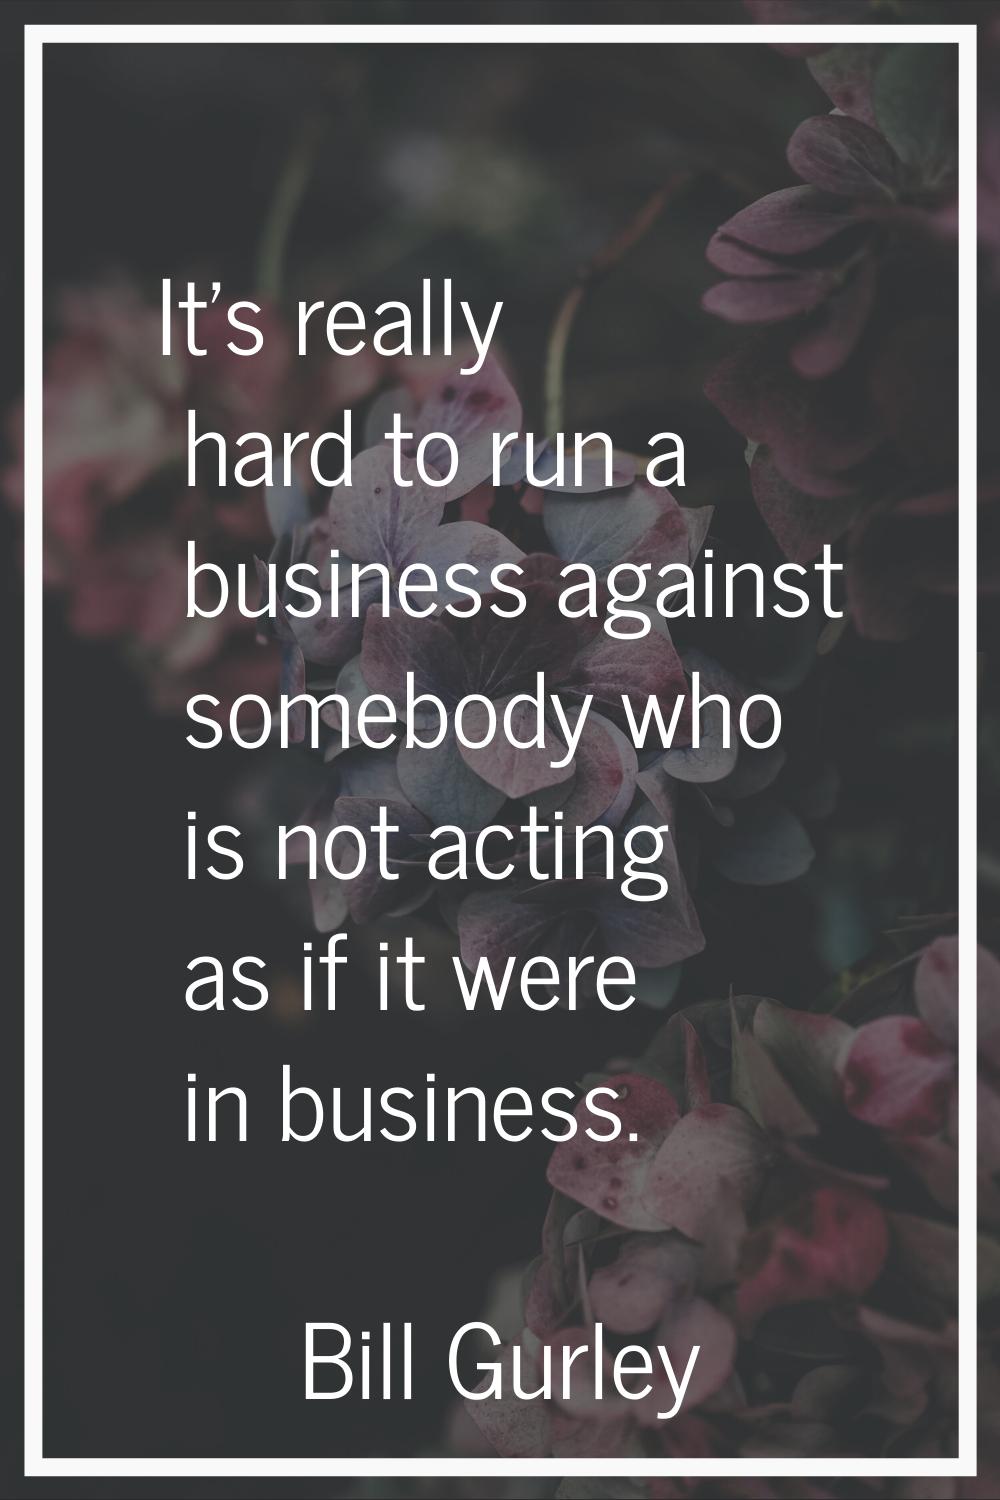 It's really hard to run a business against somebody who is not acting as if it were in business.